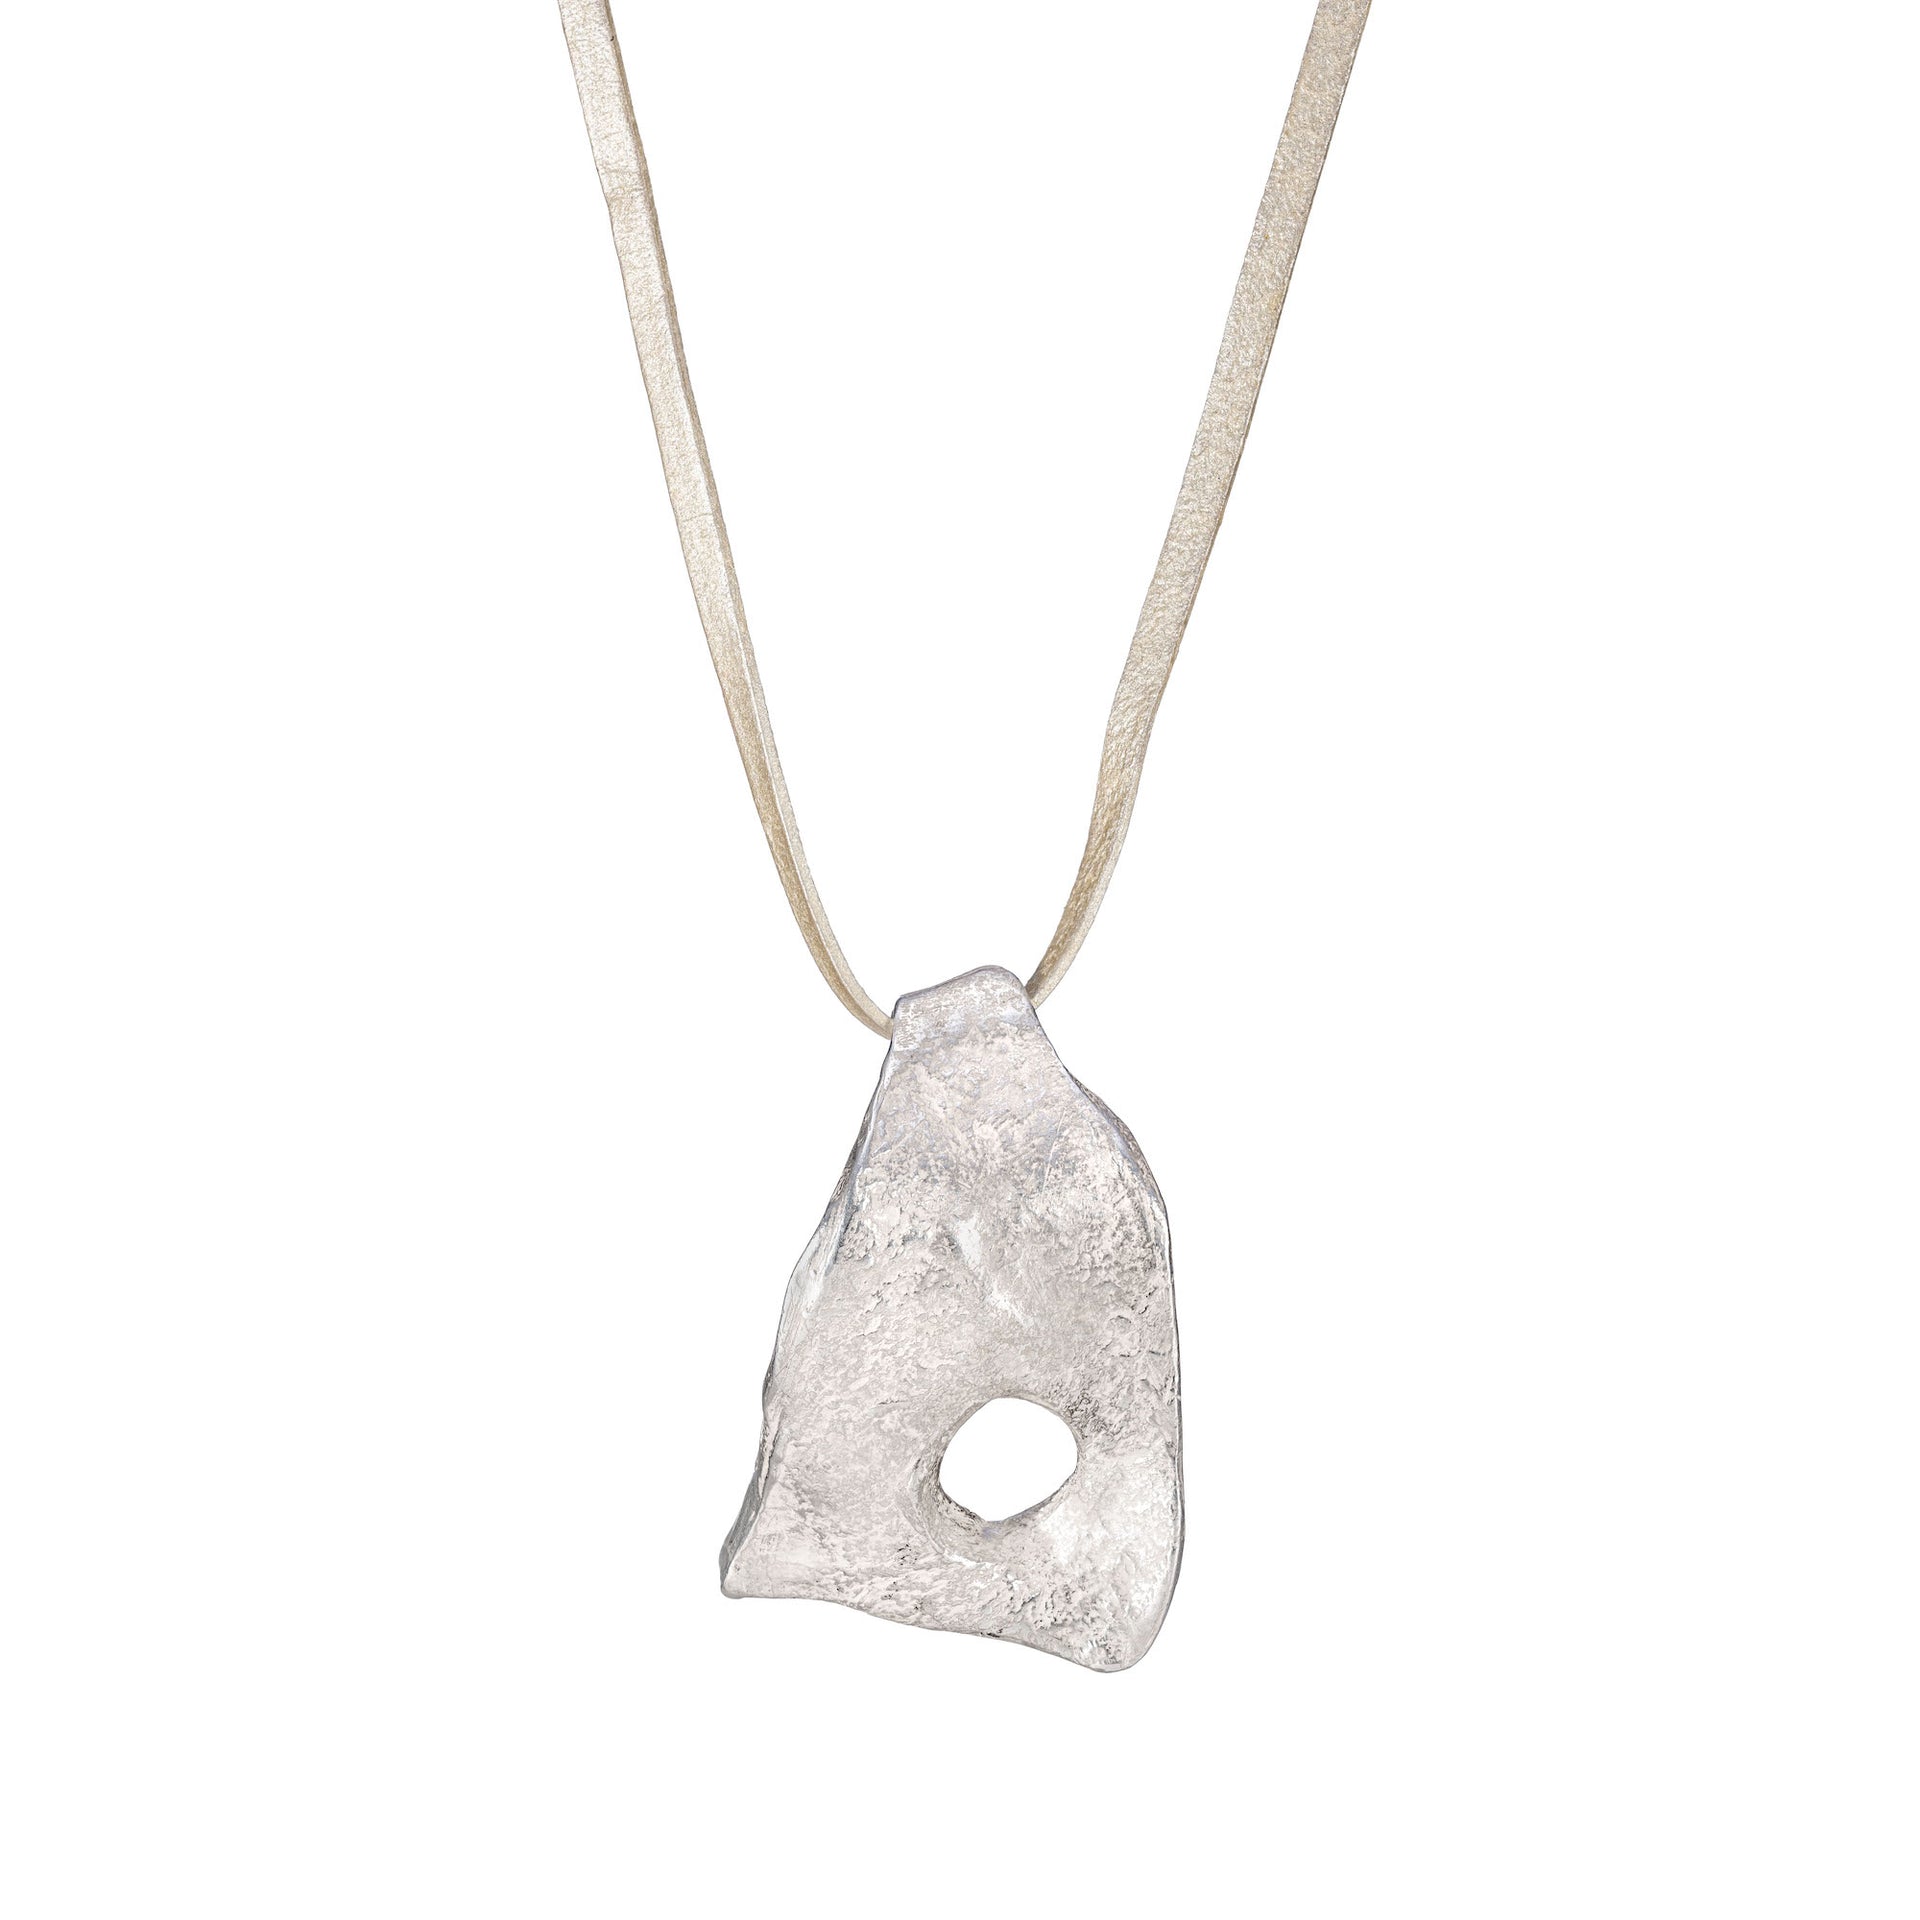 Chunky, sculptural silver pendant. Organic texture, 100% recycled silver, handmade in Cornwall by Emily Nixon.